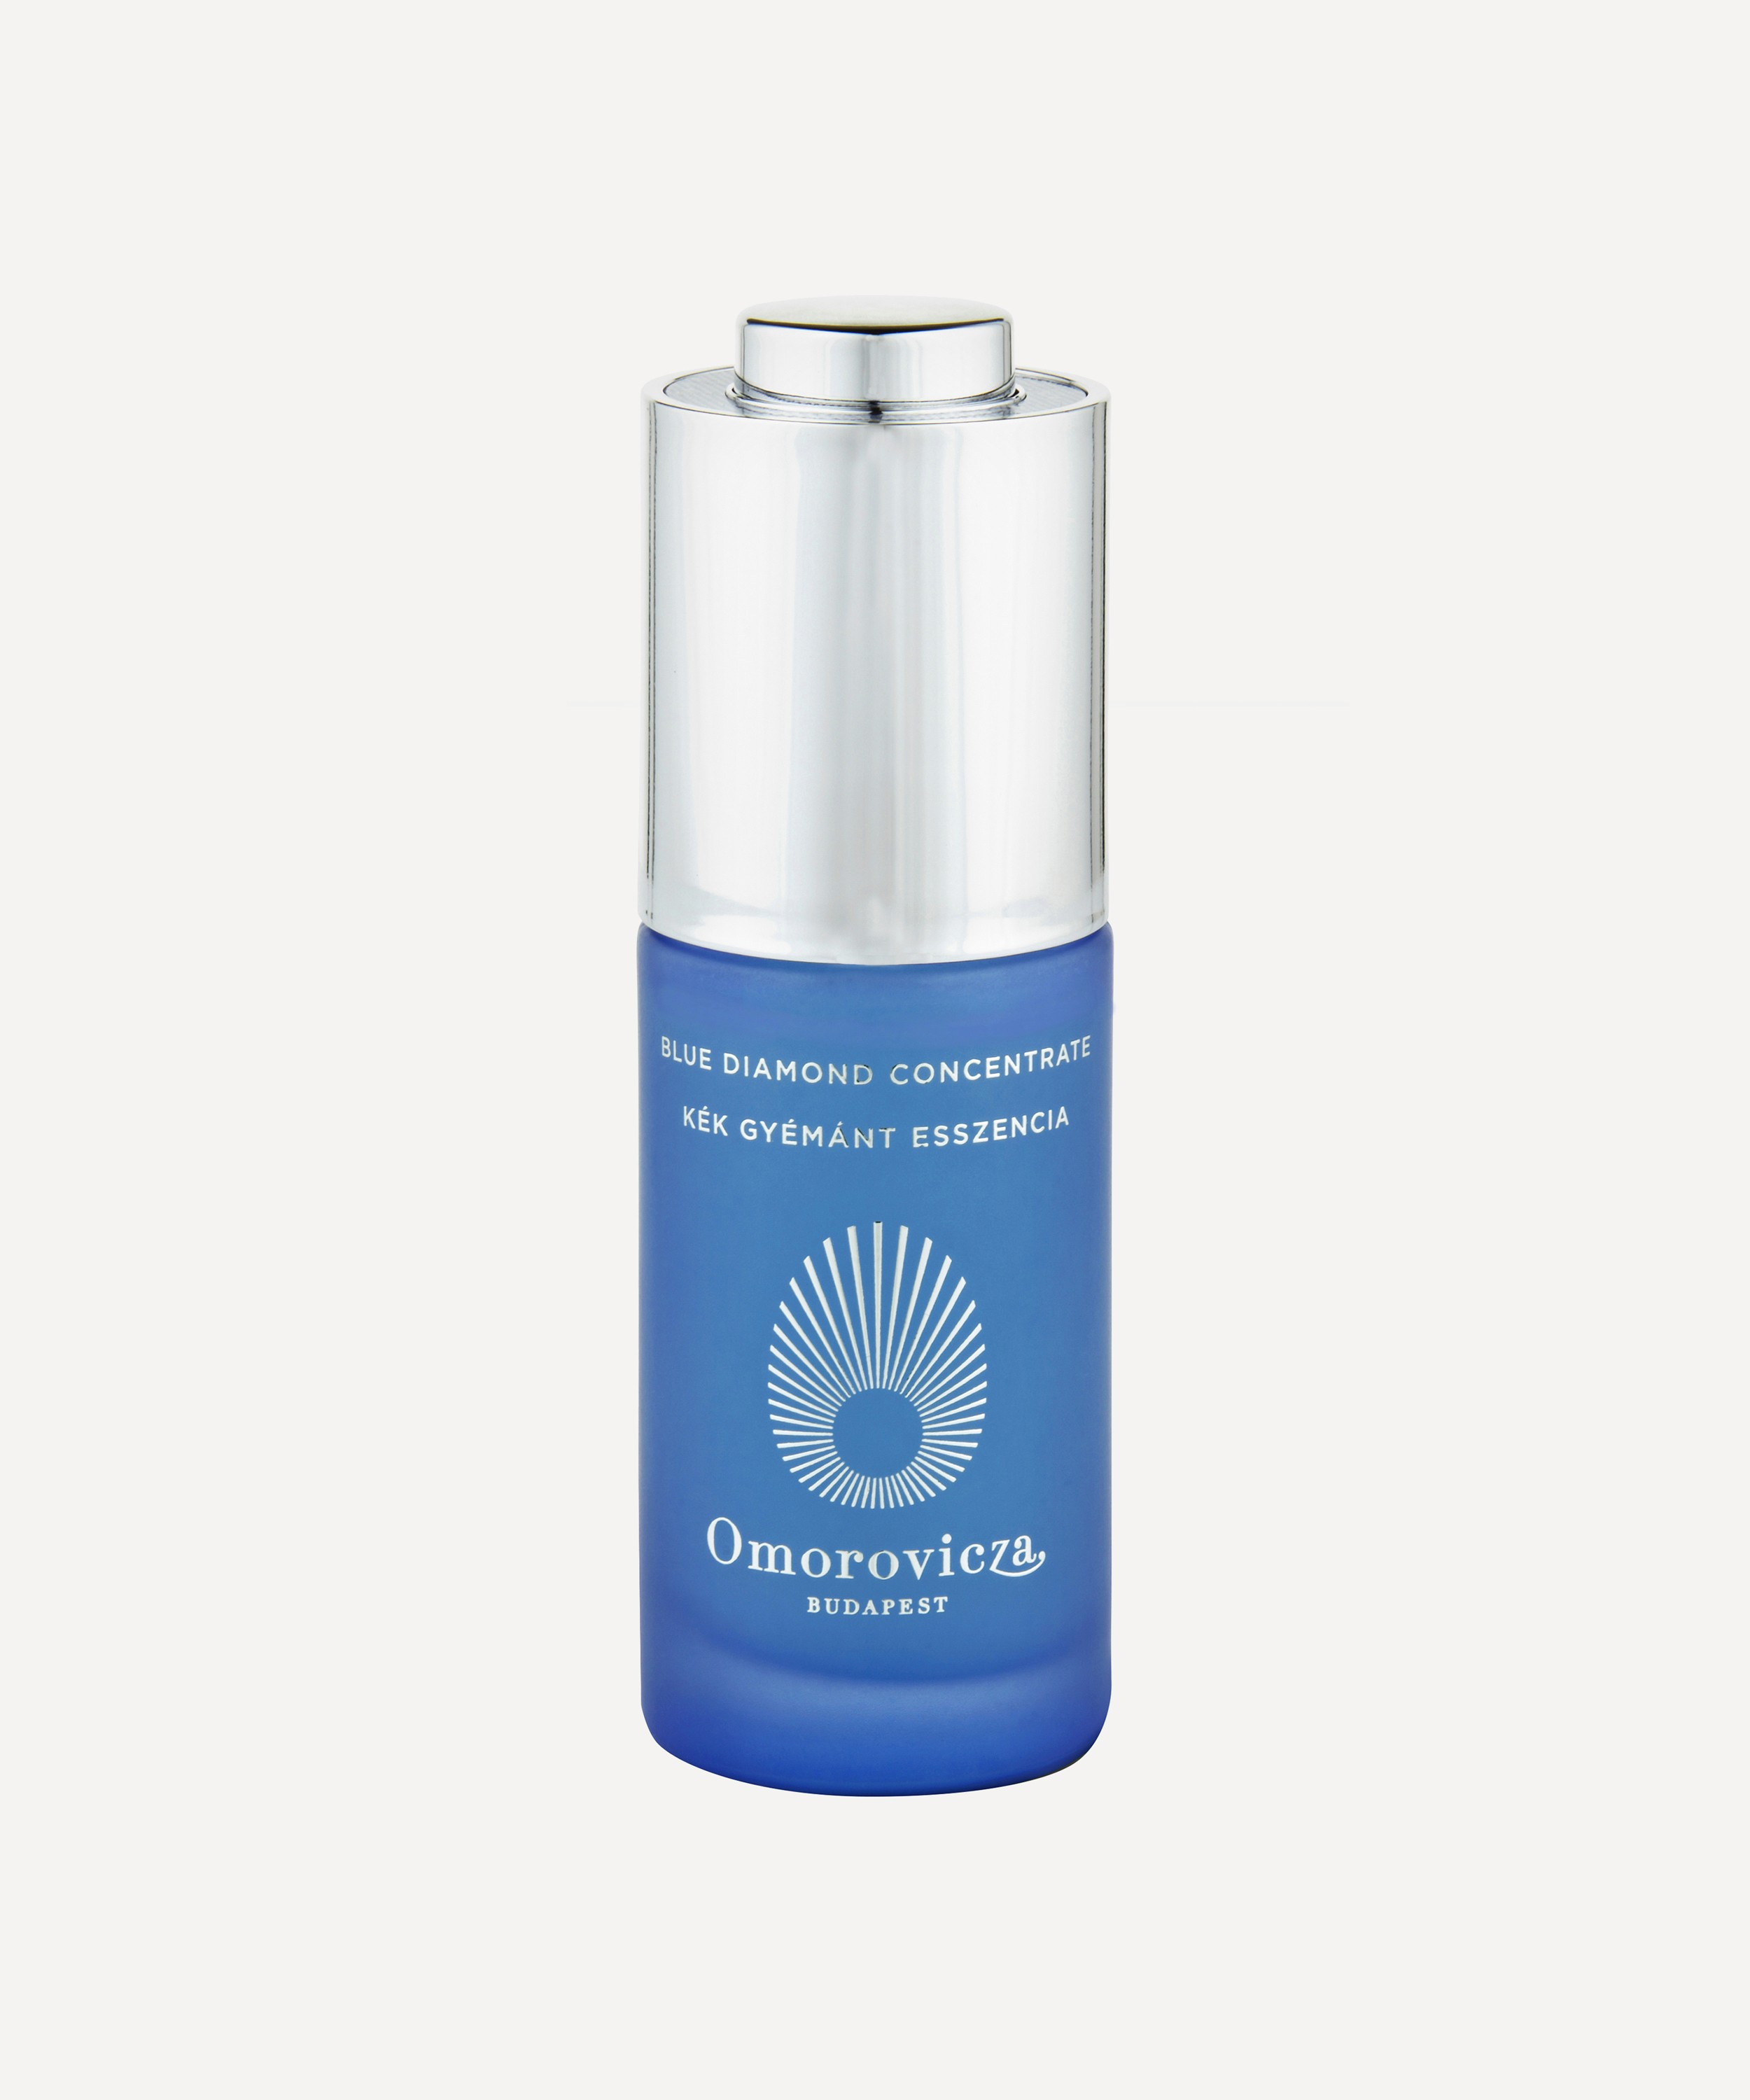 Omorovicza - Blue Diamond Concentrate 30ml image number 0